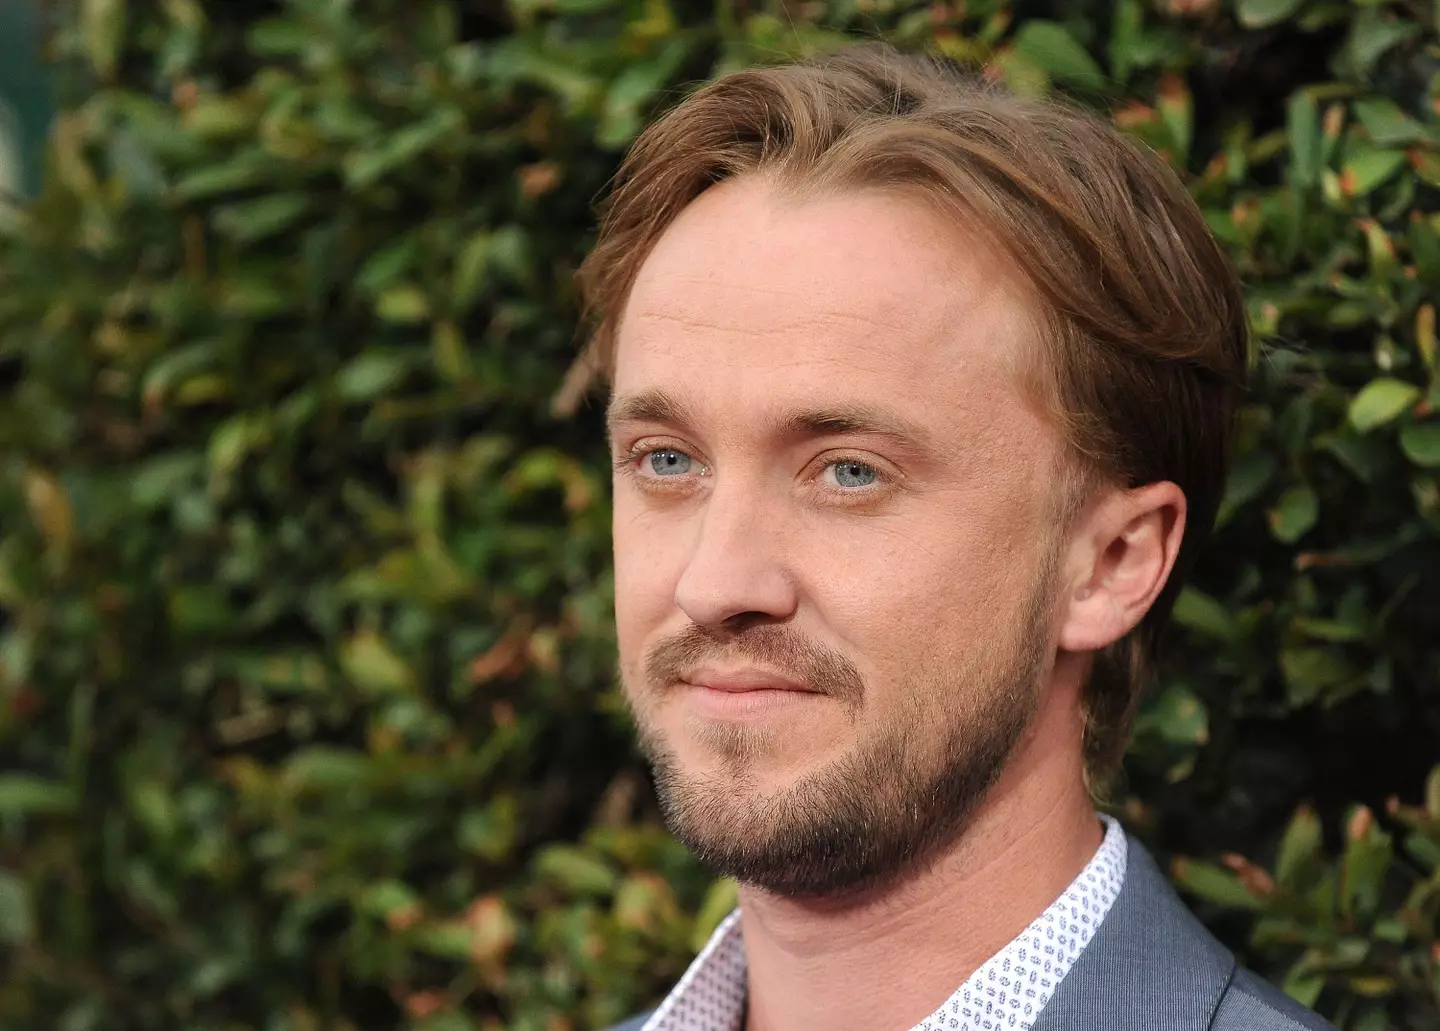 A reporter was shut down after she asked Tom Felton a question about JK Rowling.